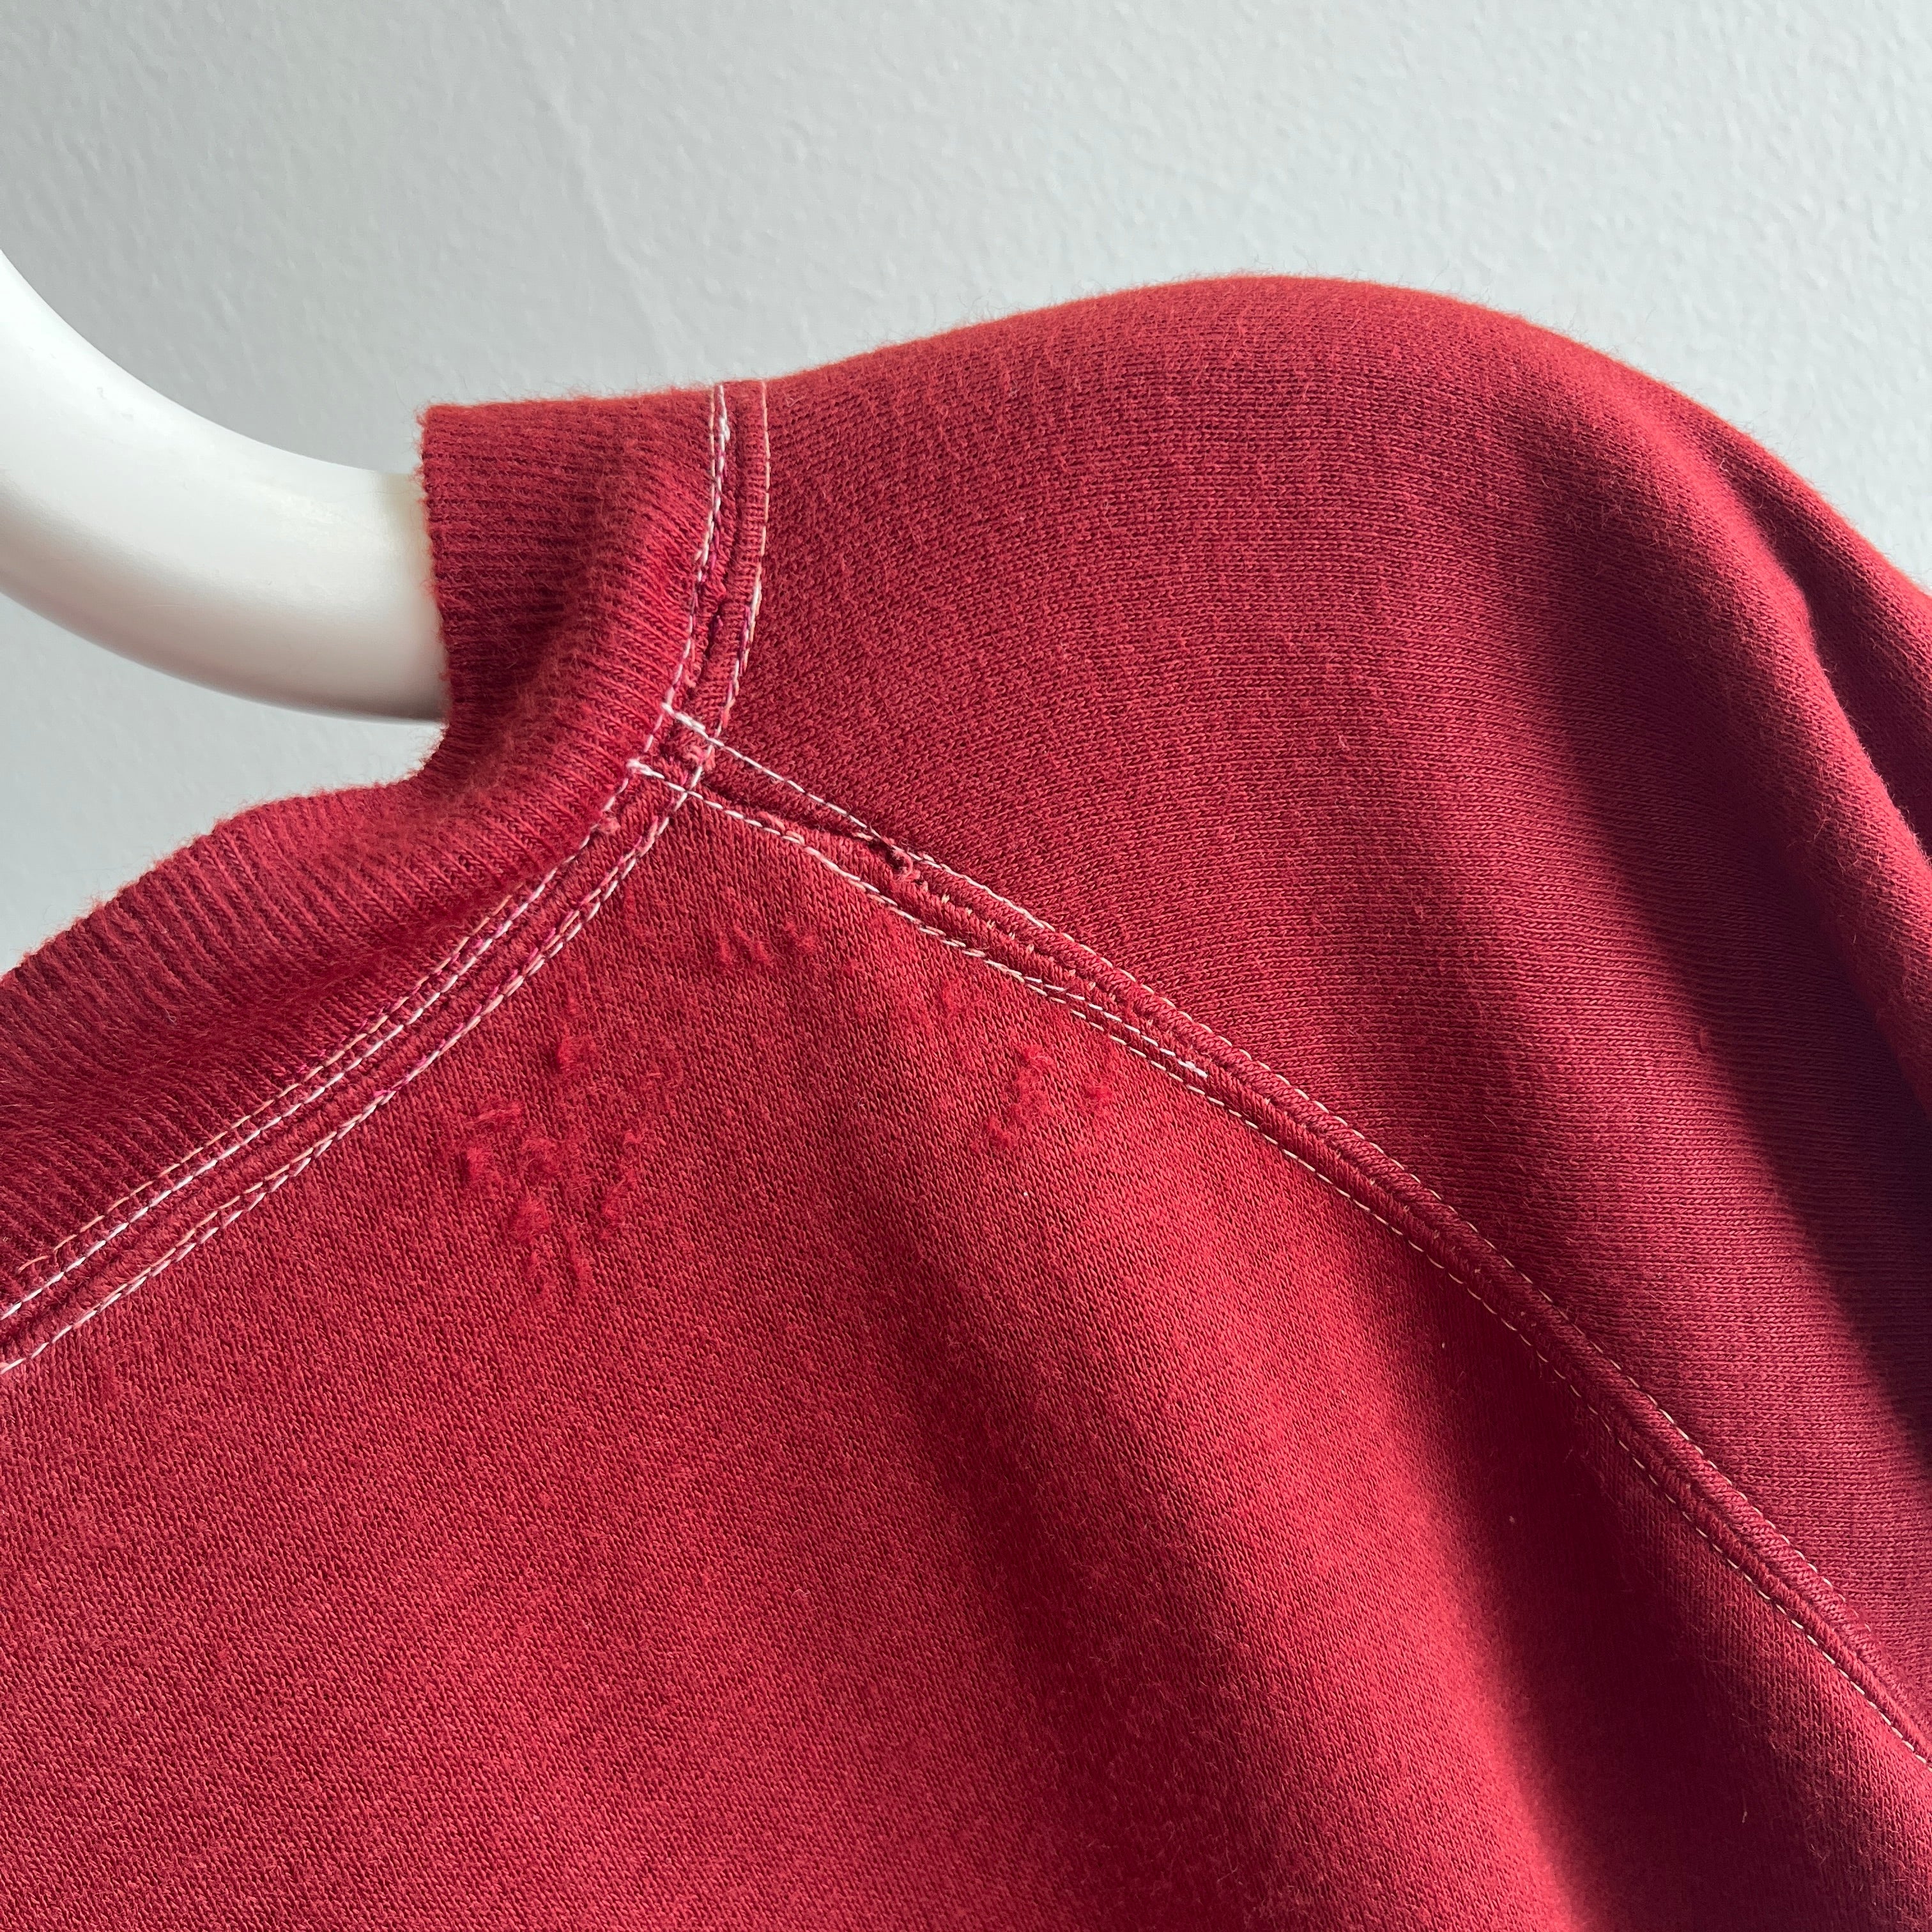 1970s Burgundy Warm Up Mended Super Soft and Silky Warm Up Sweatshirt